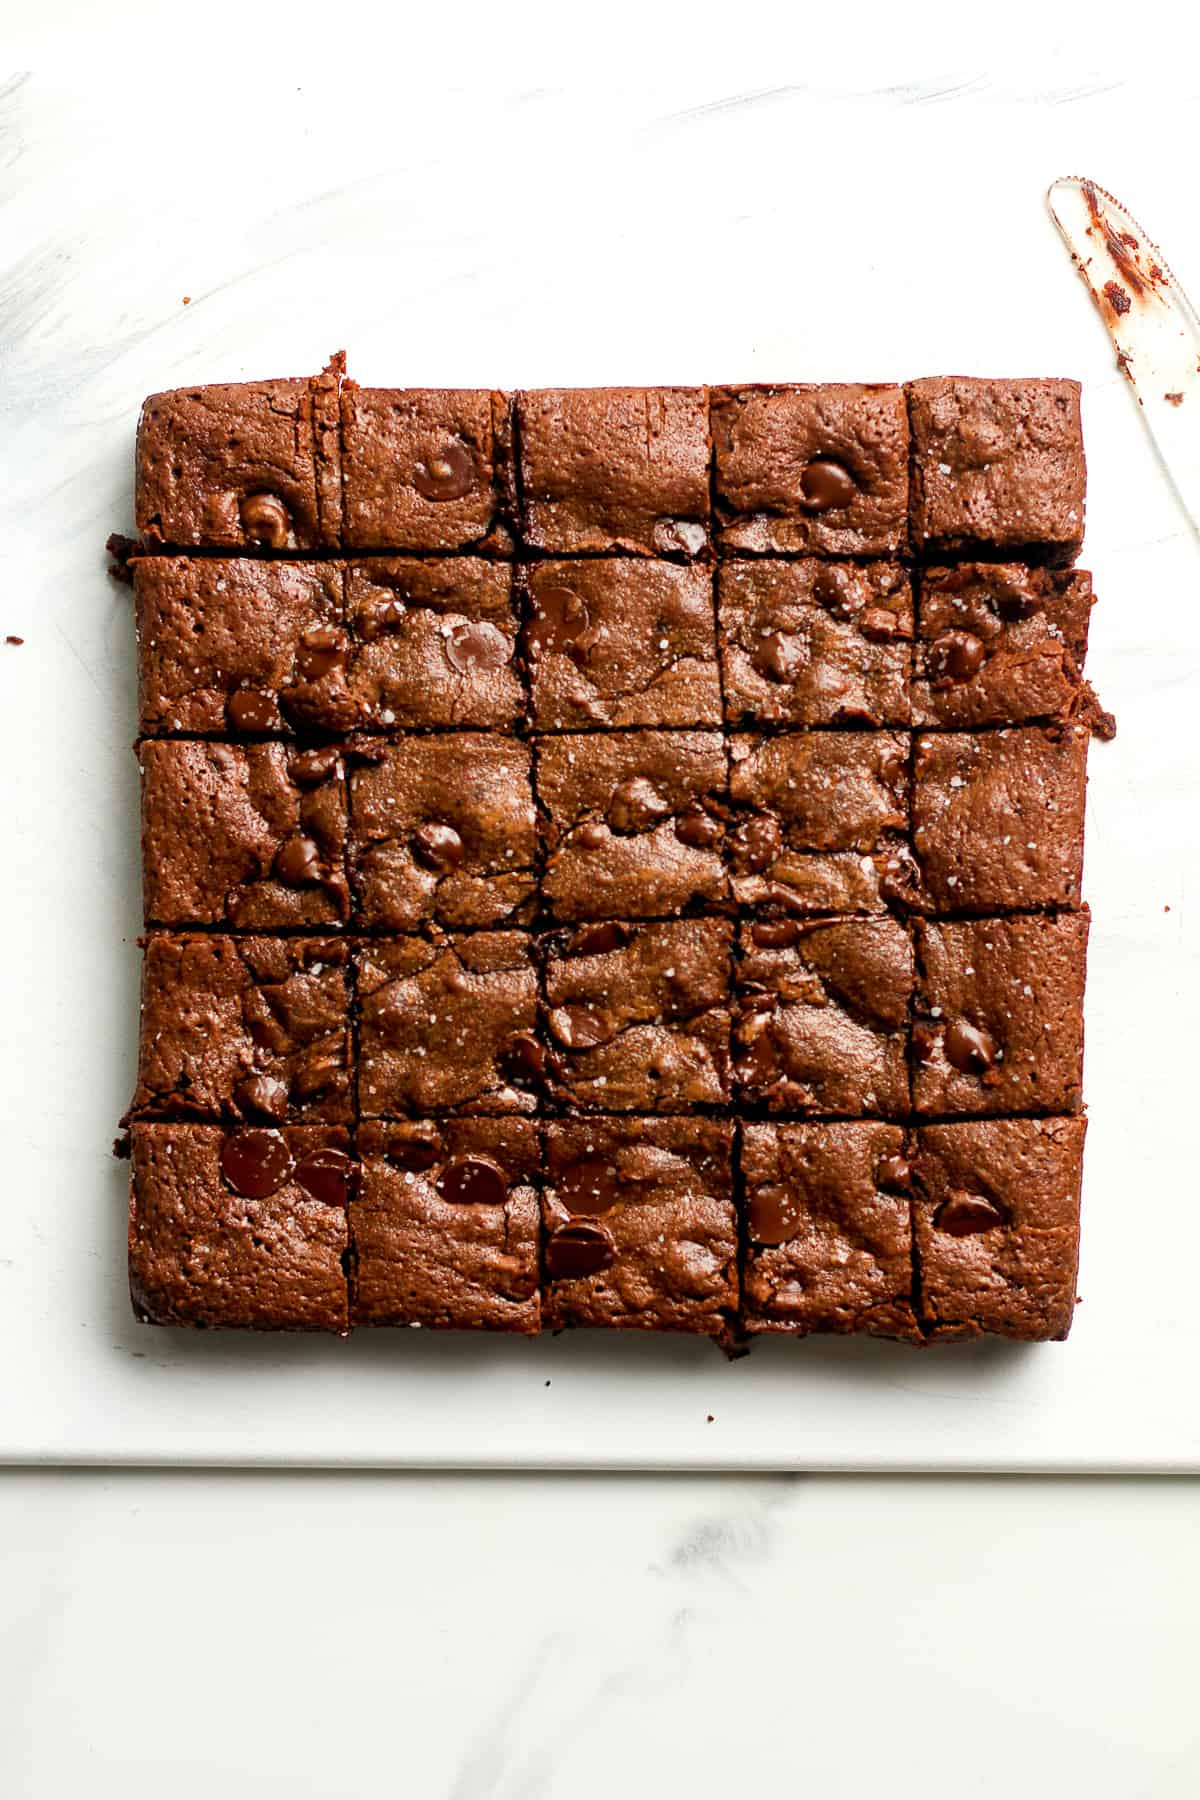 The brownies cut into 25 squares.